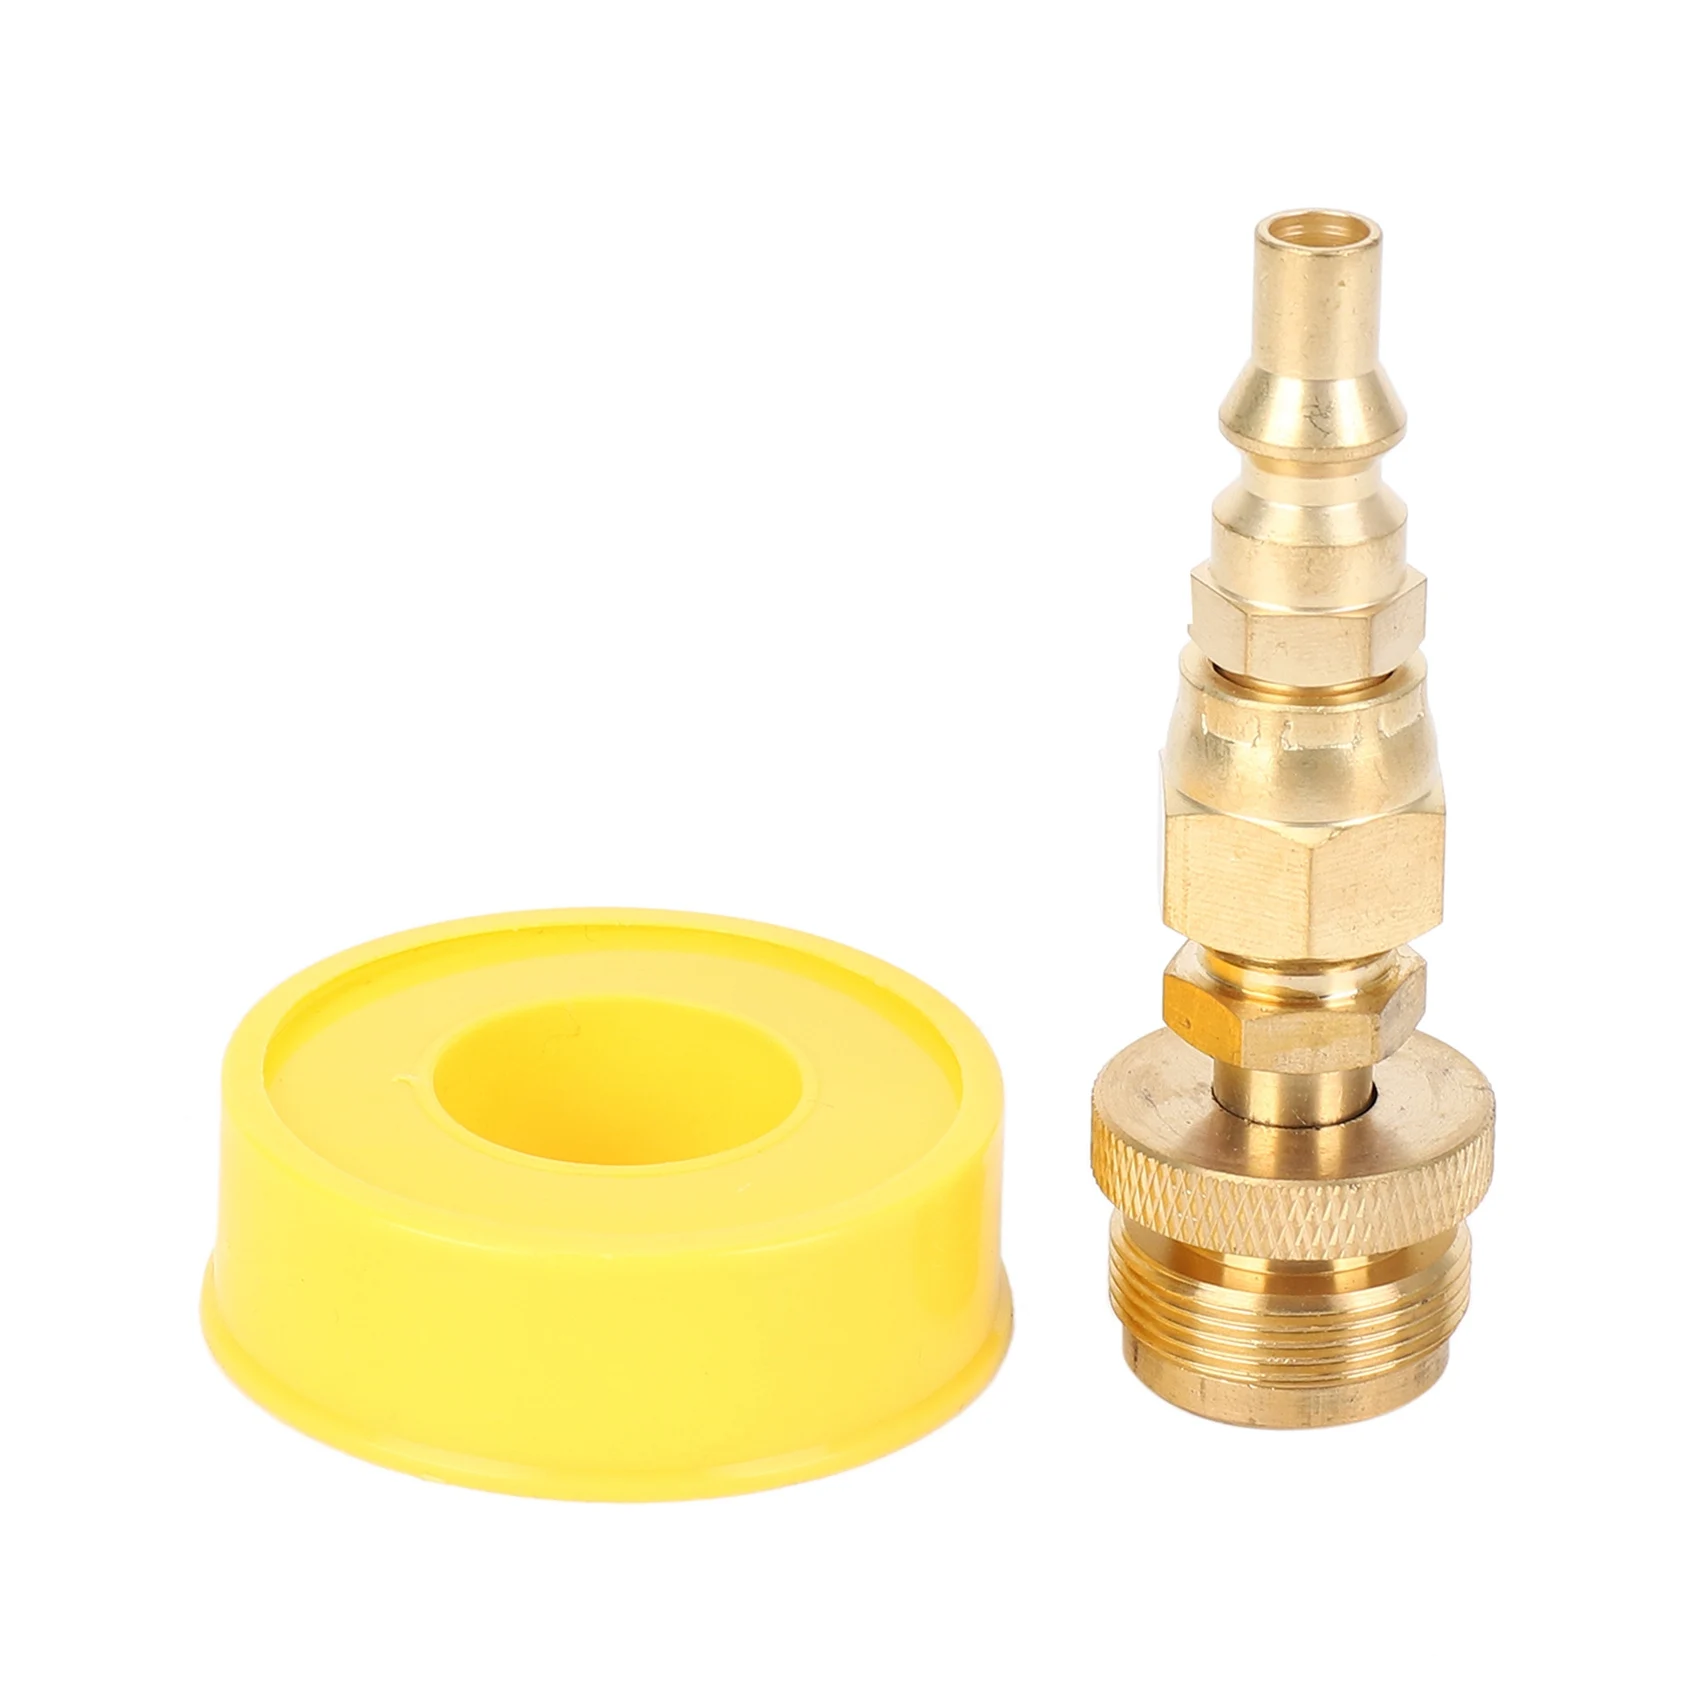 

1LB Propane Regulator Adapter 1in -20 Male Throwaway Cylinder to 3/8in Male Flare and 1/4in Quick Connect Plug Fitting